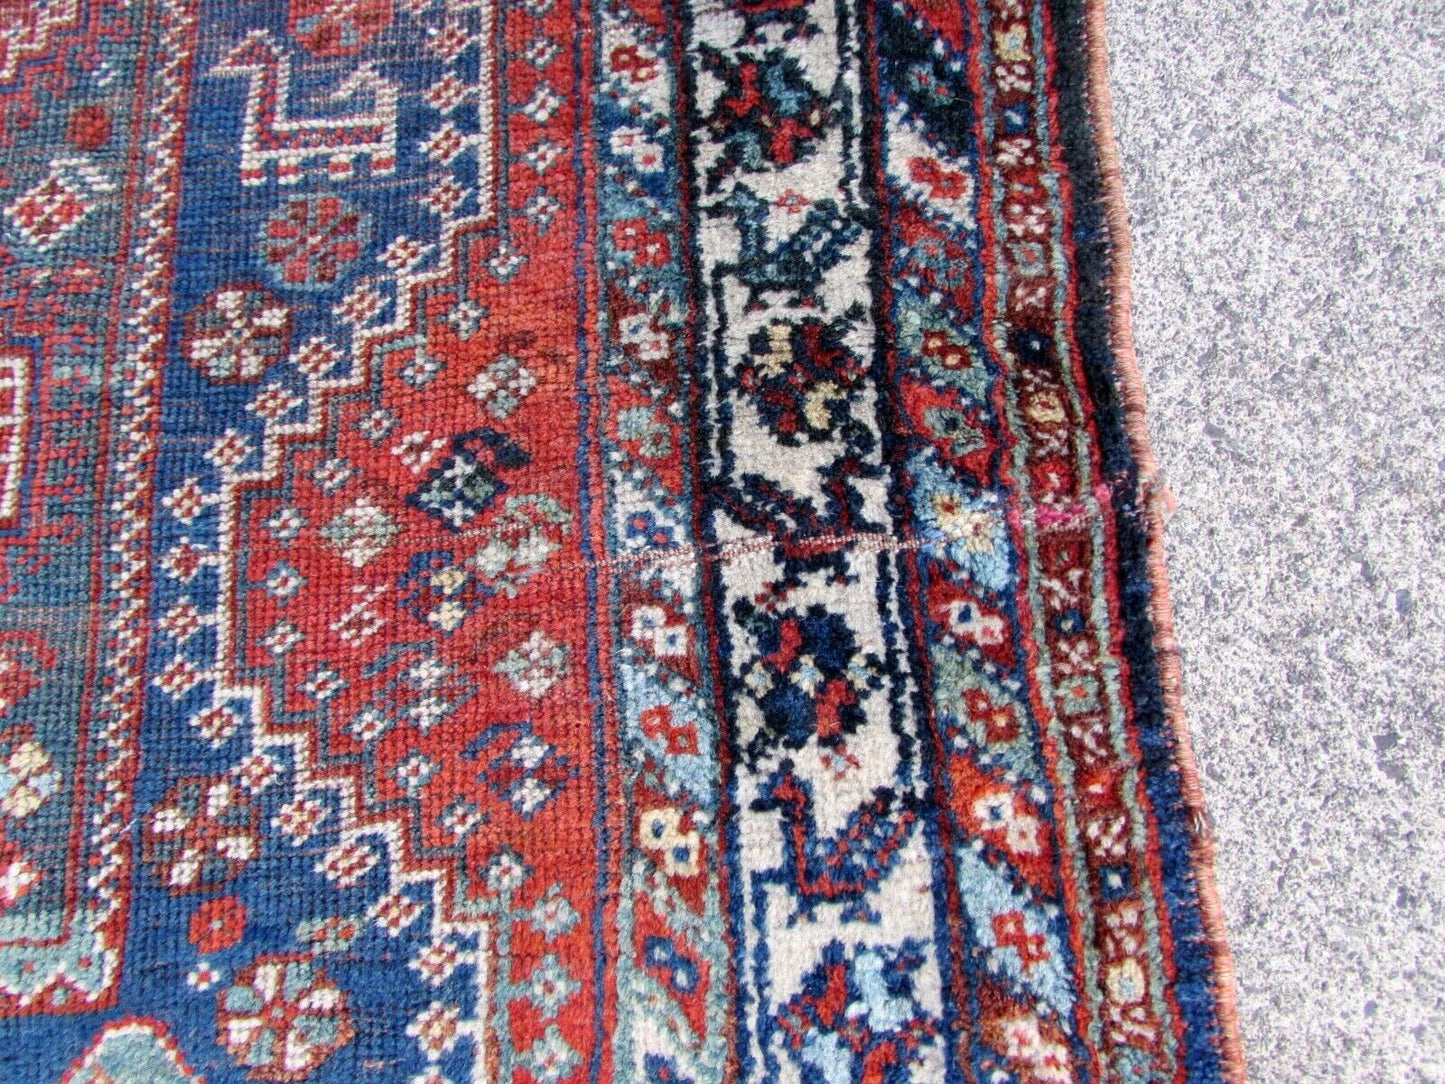 Detailed shot of the low pile on antique Middle Eastern rug